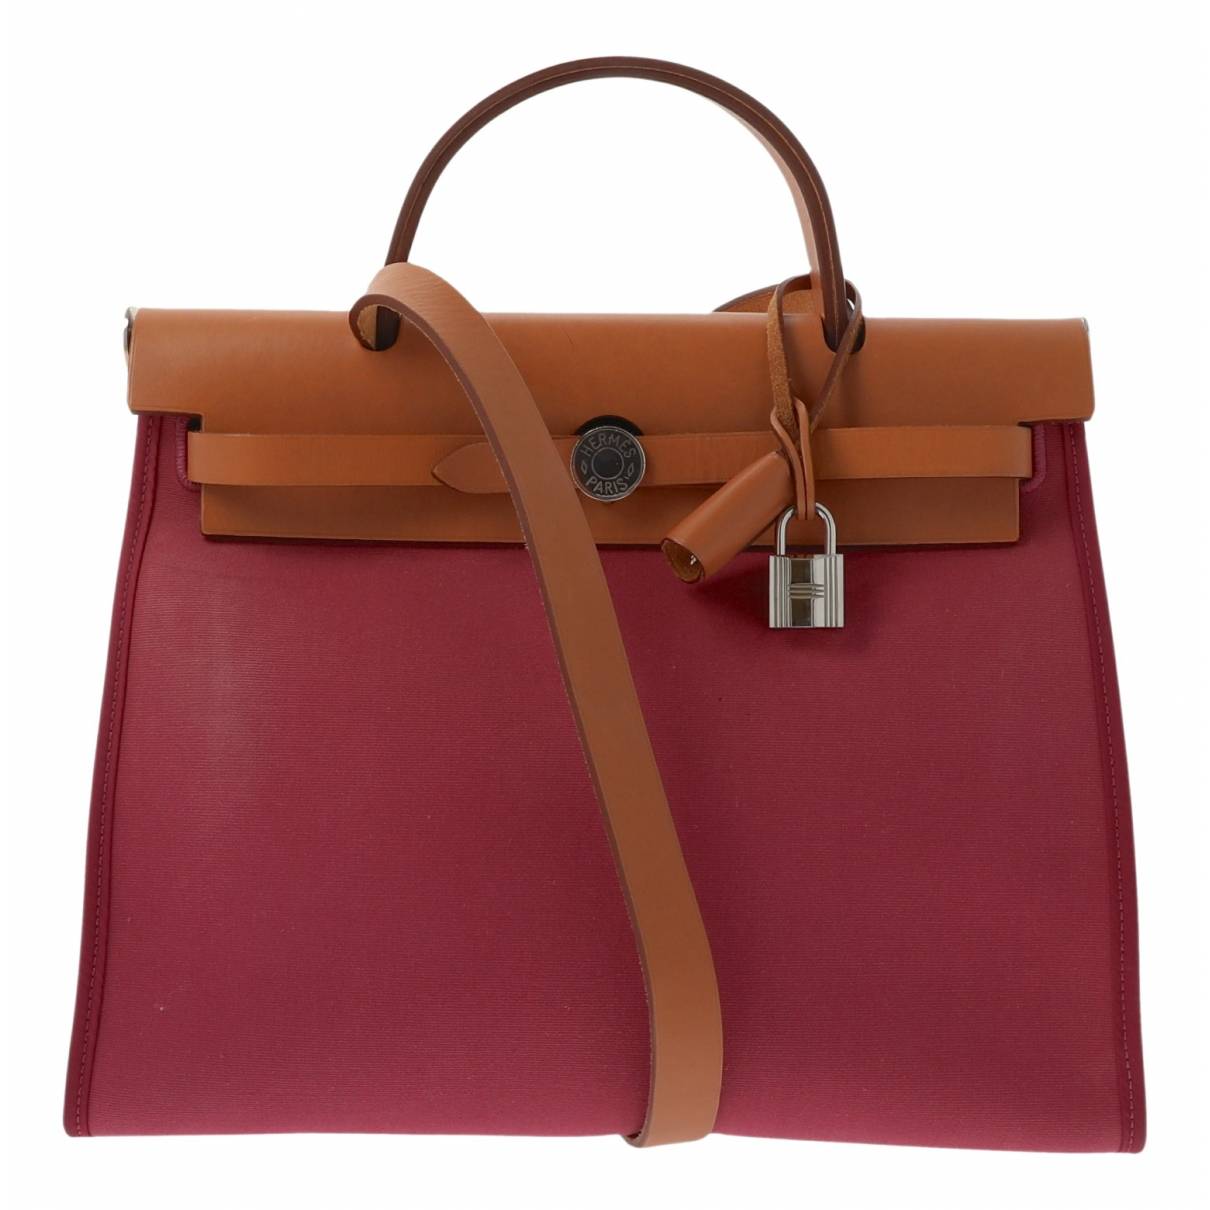 The HerBag Zip PM in Rose Purple canvas and Natural leather with